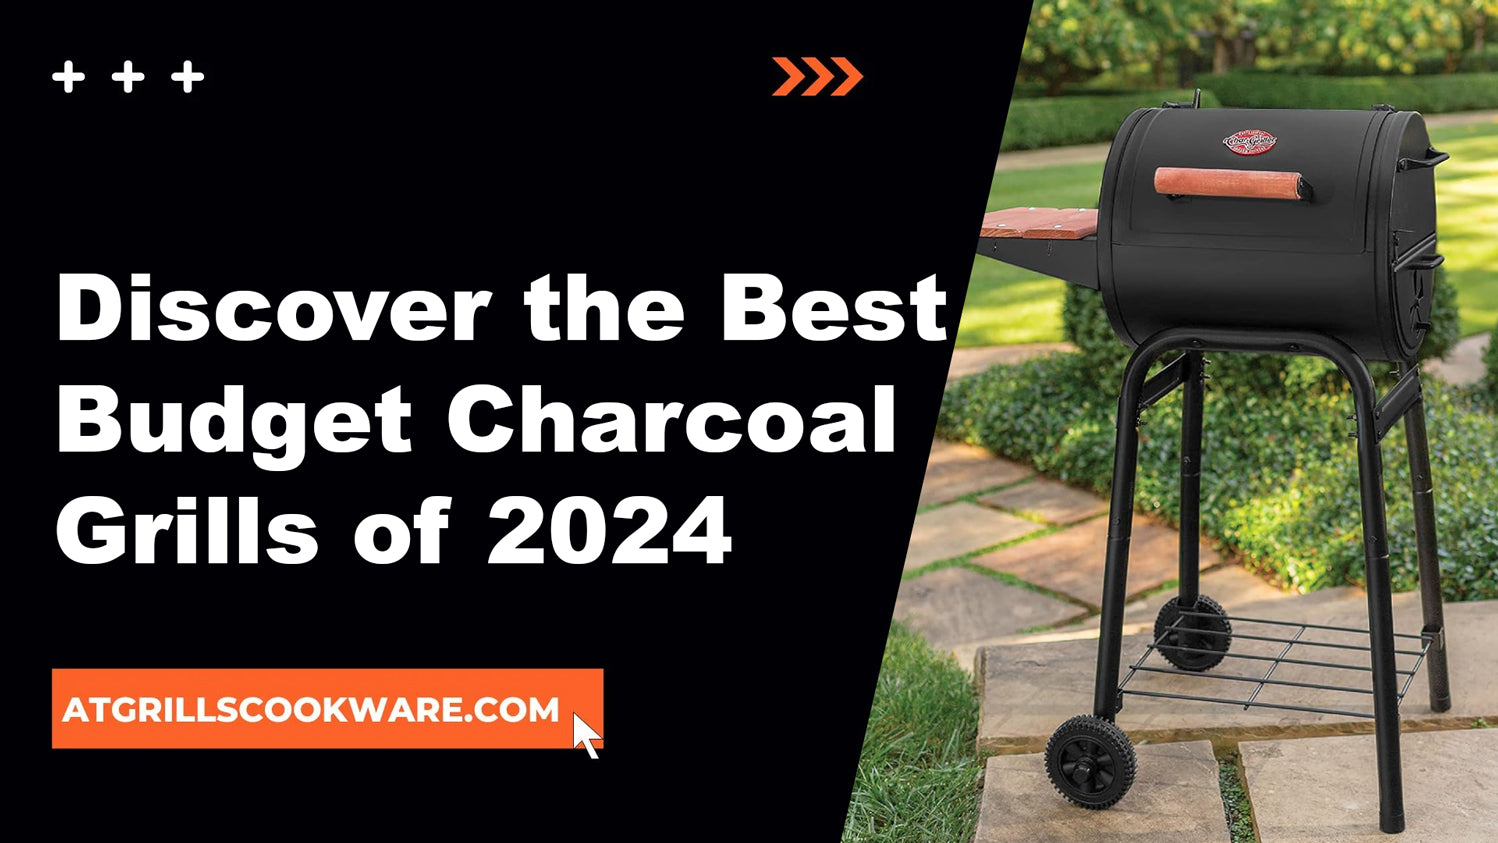 Discover the Best Budget Charcoal Grills of 2024 ATGRILLS